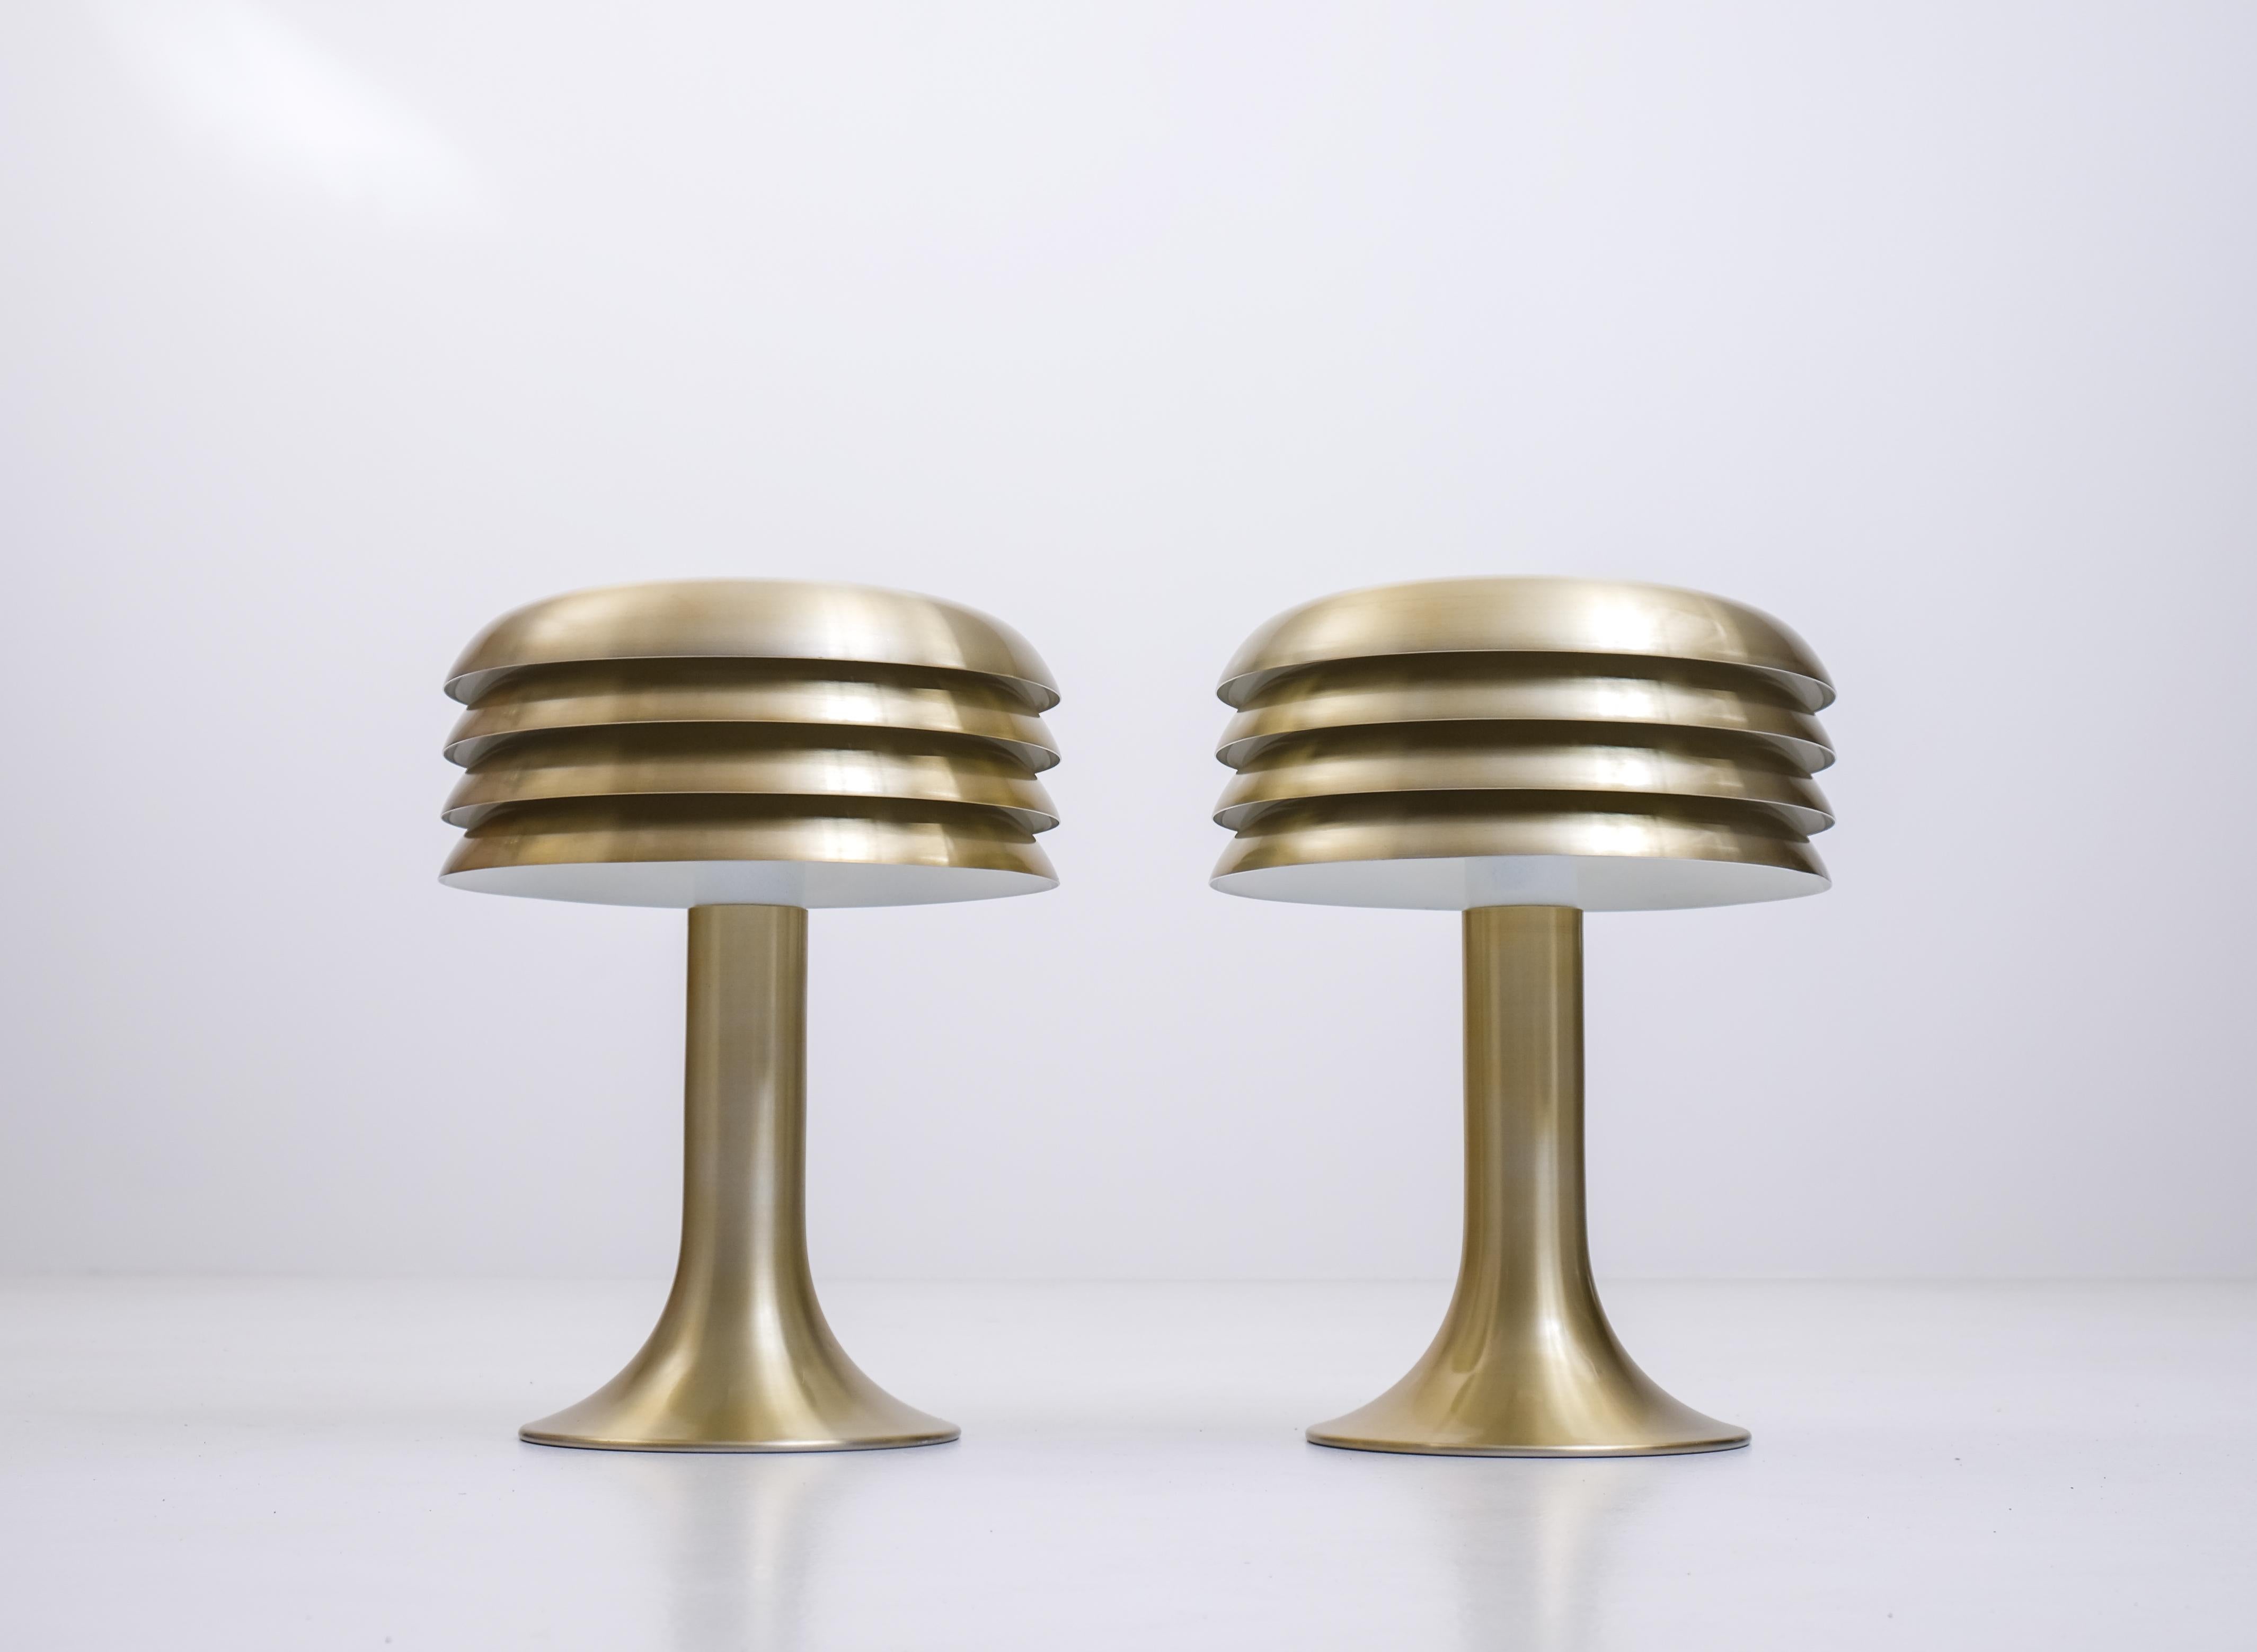 Pair of Hans-Agne Jakobsson Table Lamps BN-26, 1960s For Sale 4